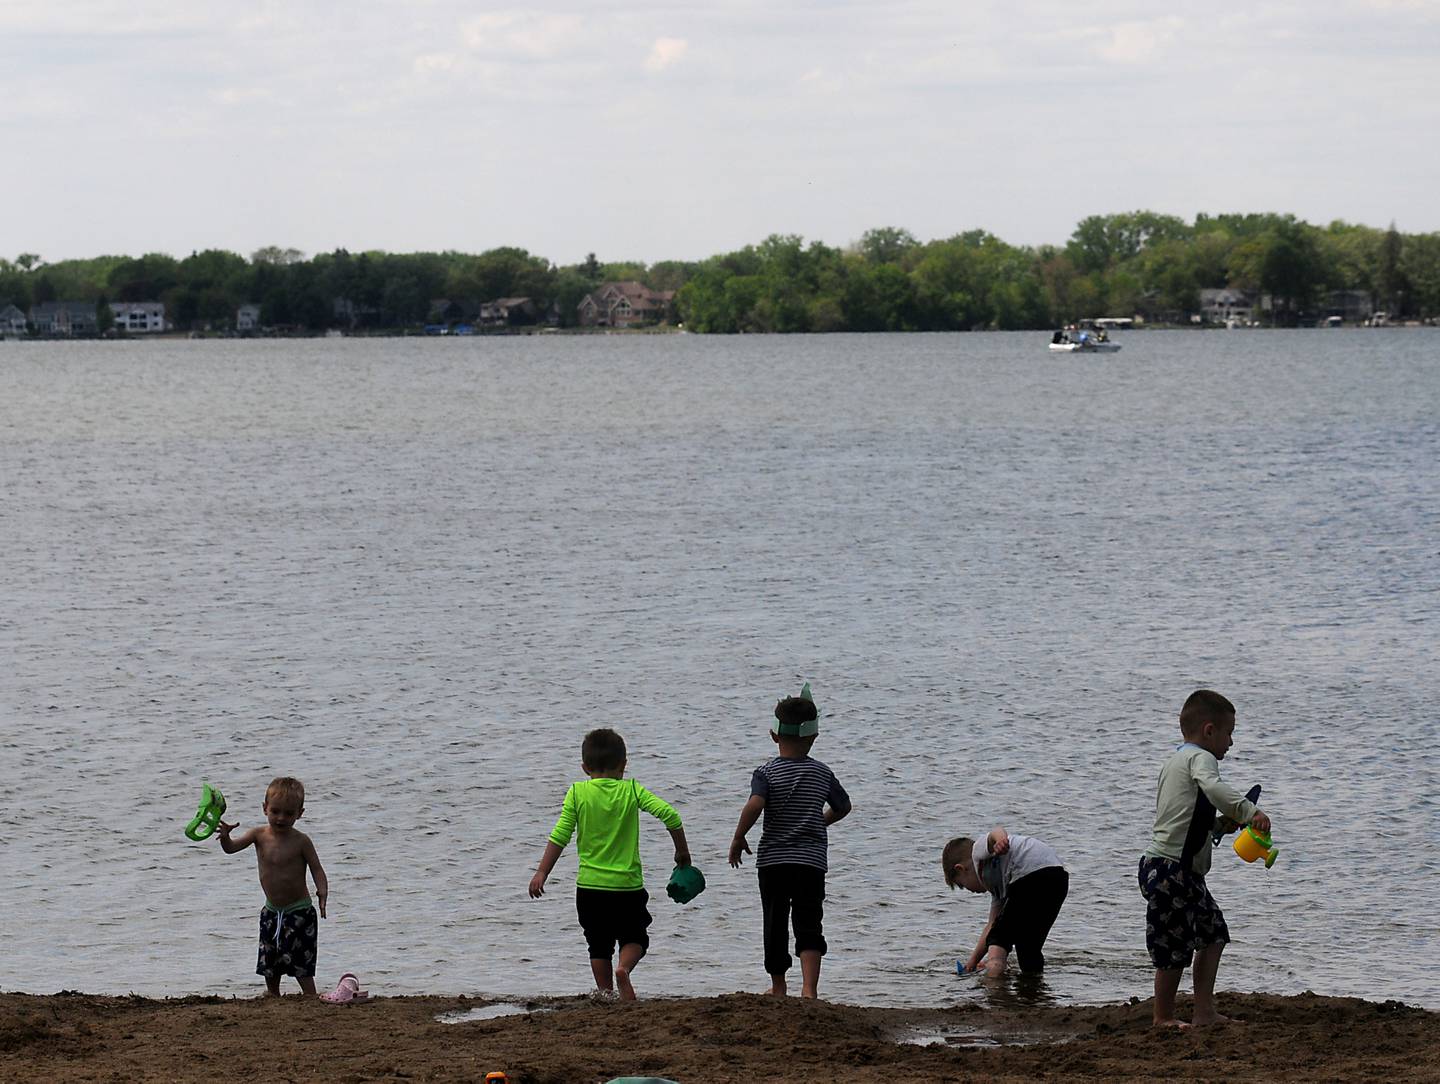 Children from a birthday party play on the beach Monday, May 23, 2022, at Crystal Lake's Main Beach, 300 Lakeshore Drive, in Crystal Lake.